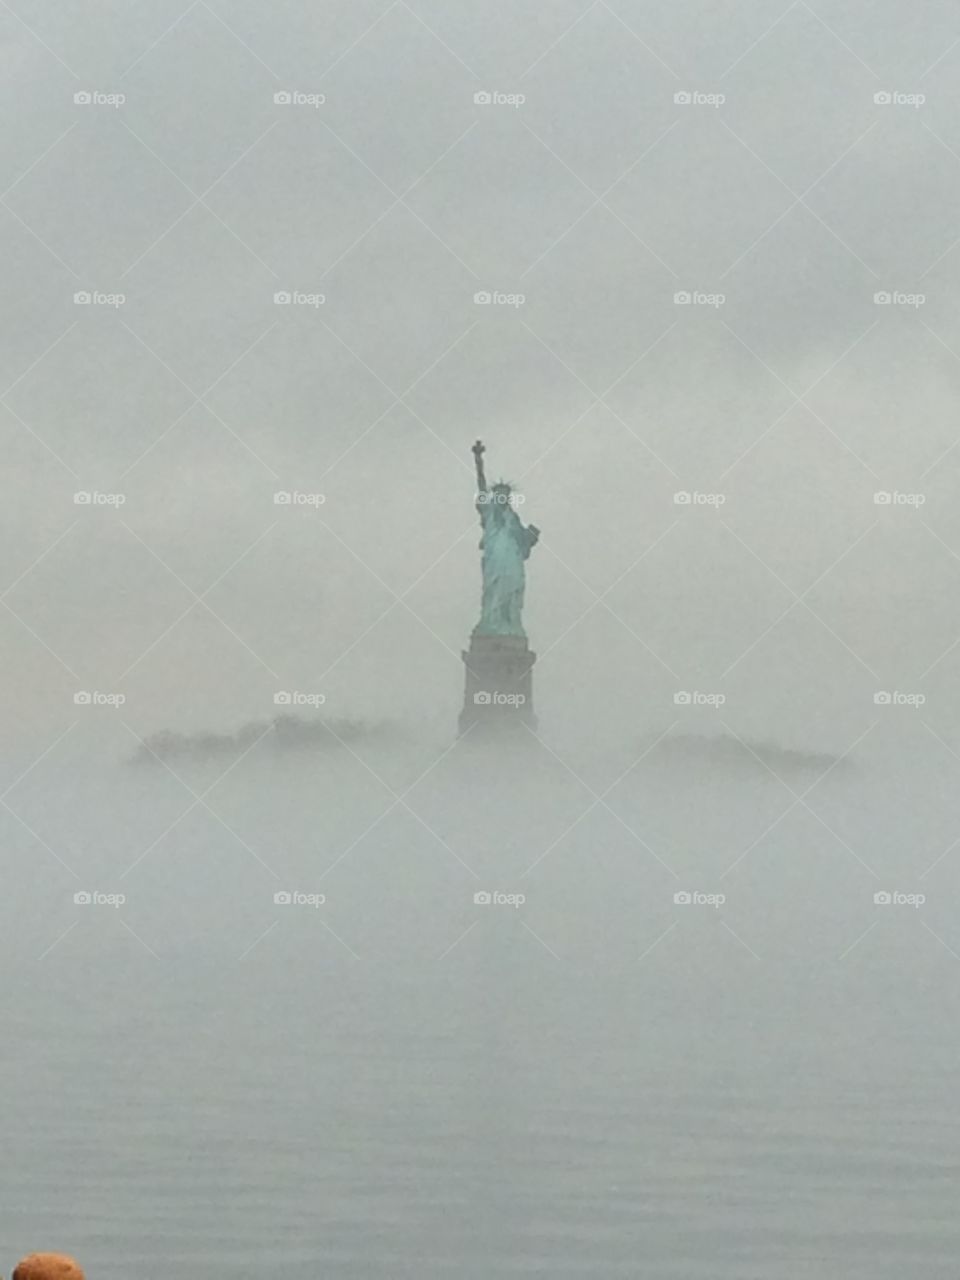 Lady Liberty . Statue of Liberty through the fog in New York City from the Staten Island Ferry